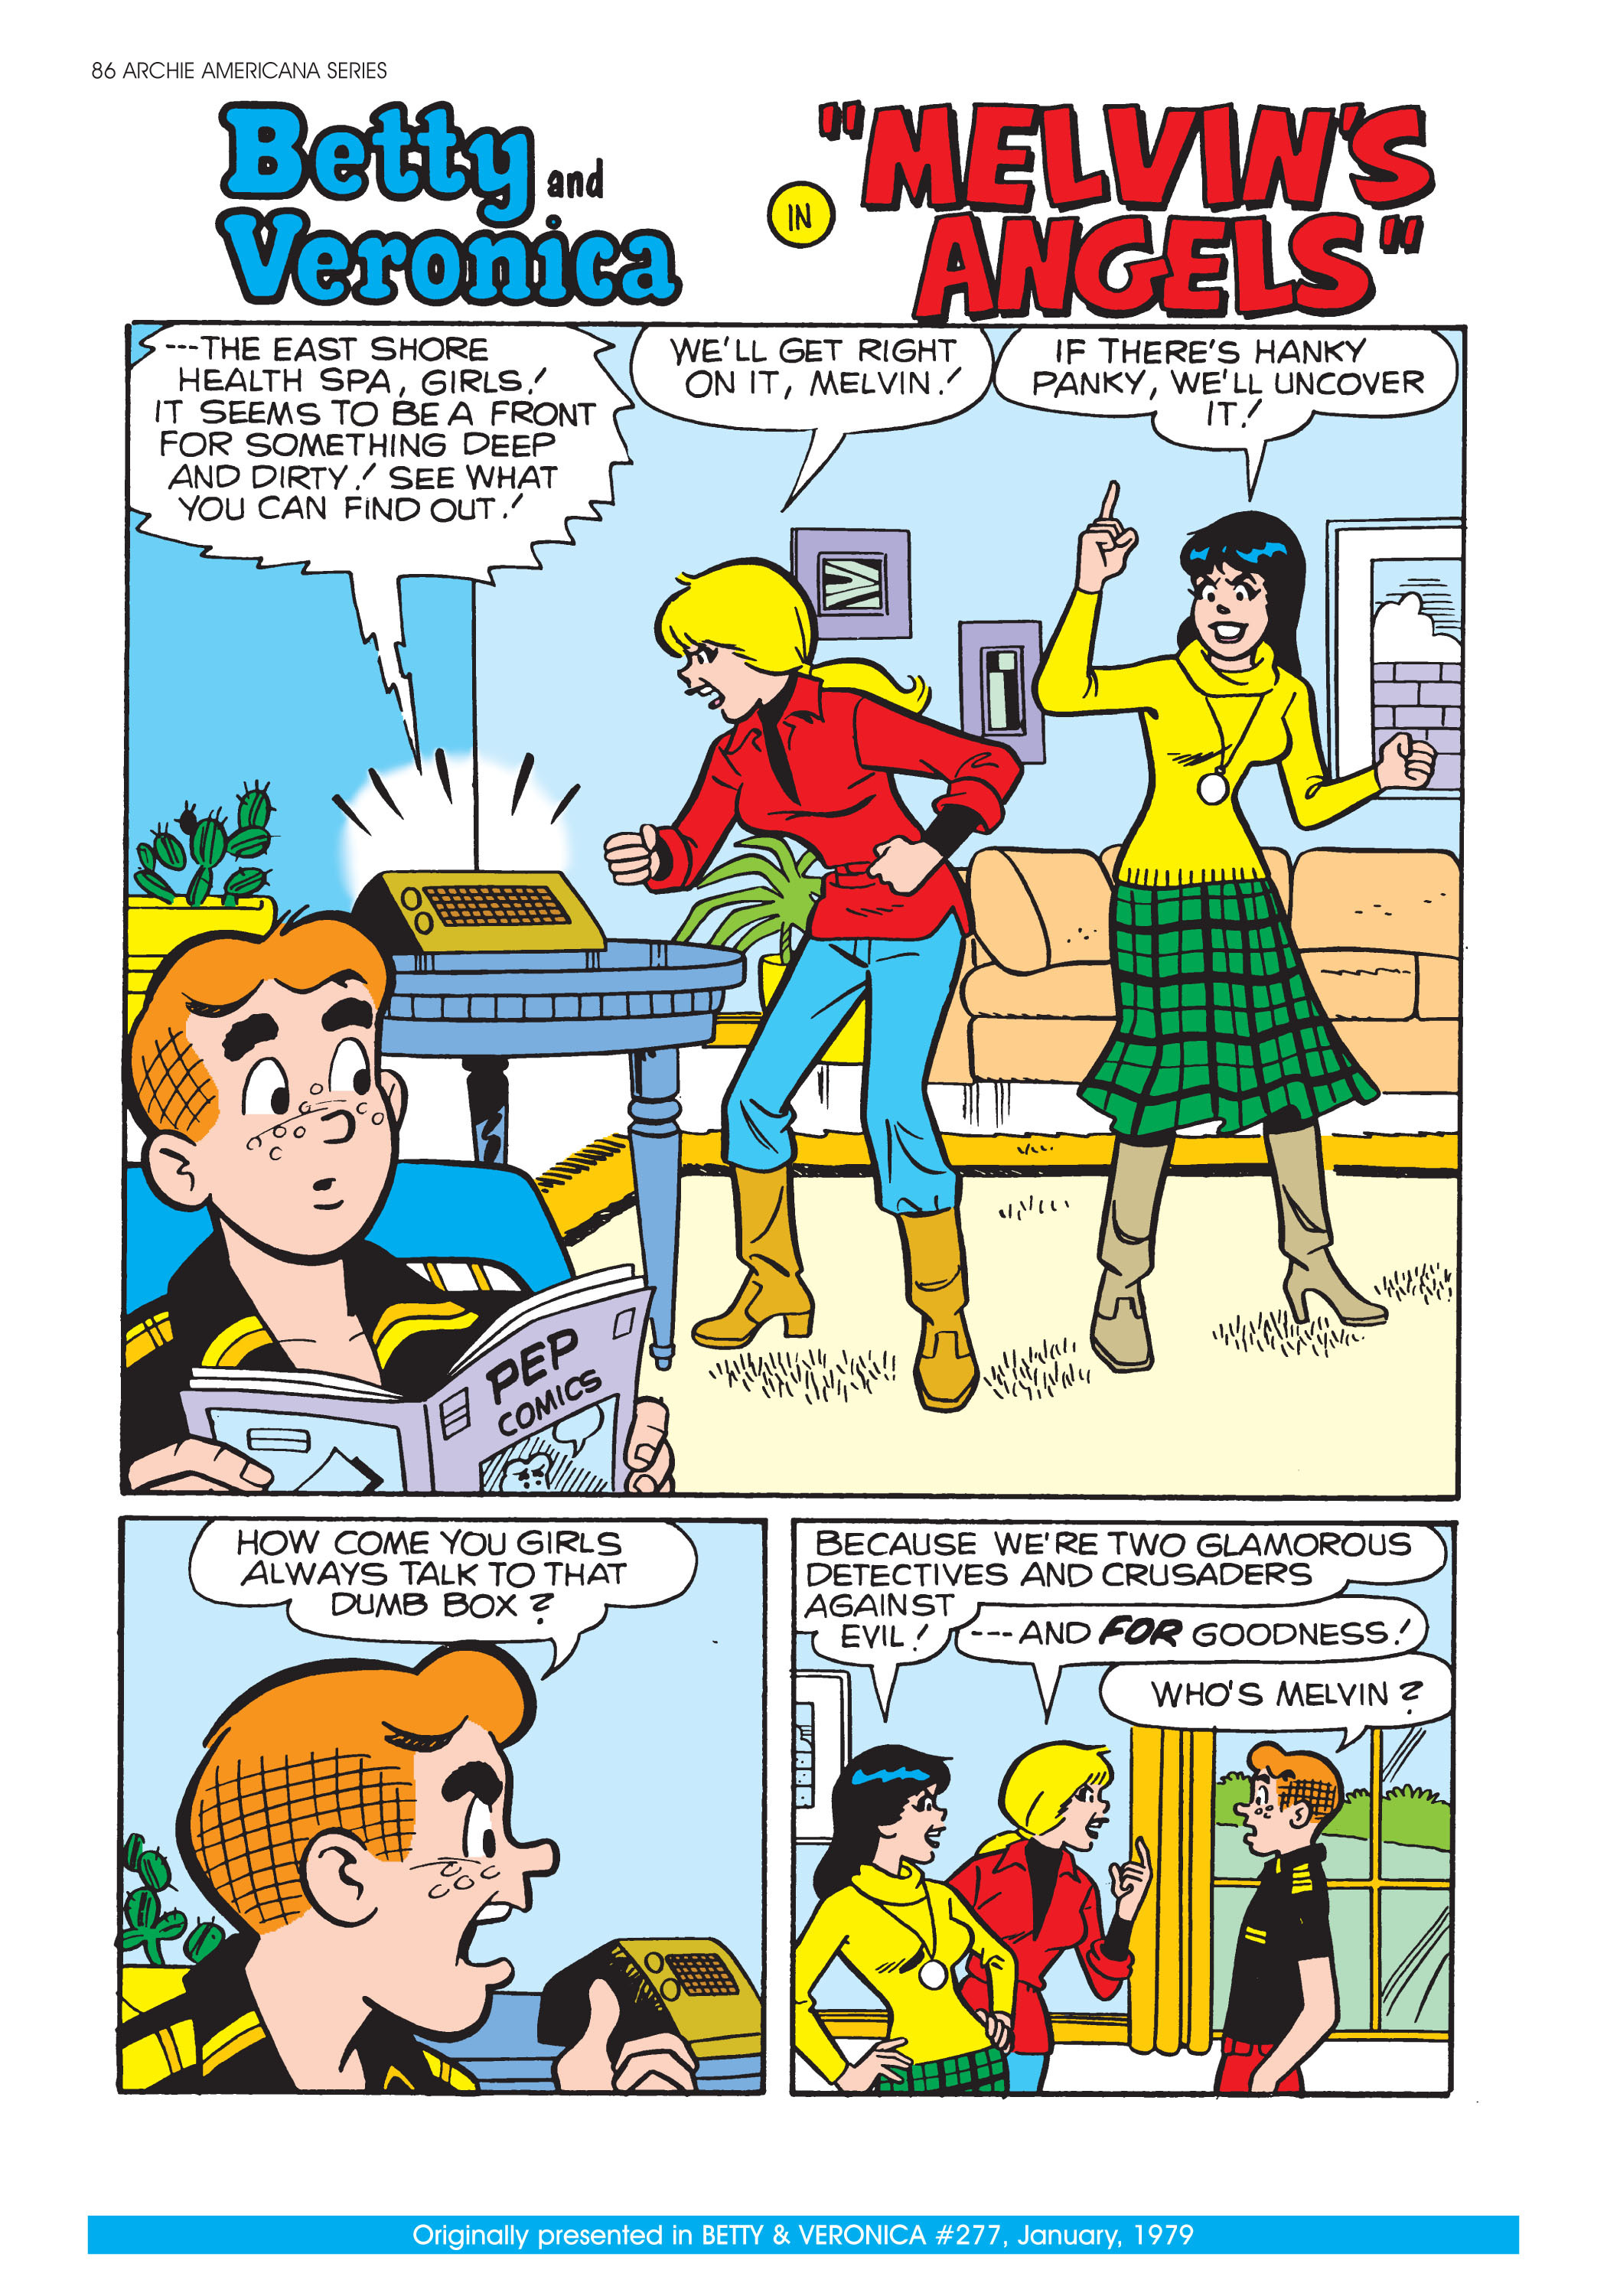 Read online Archie Americana Series comic -  Issue # TPB 4 - 88